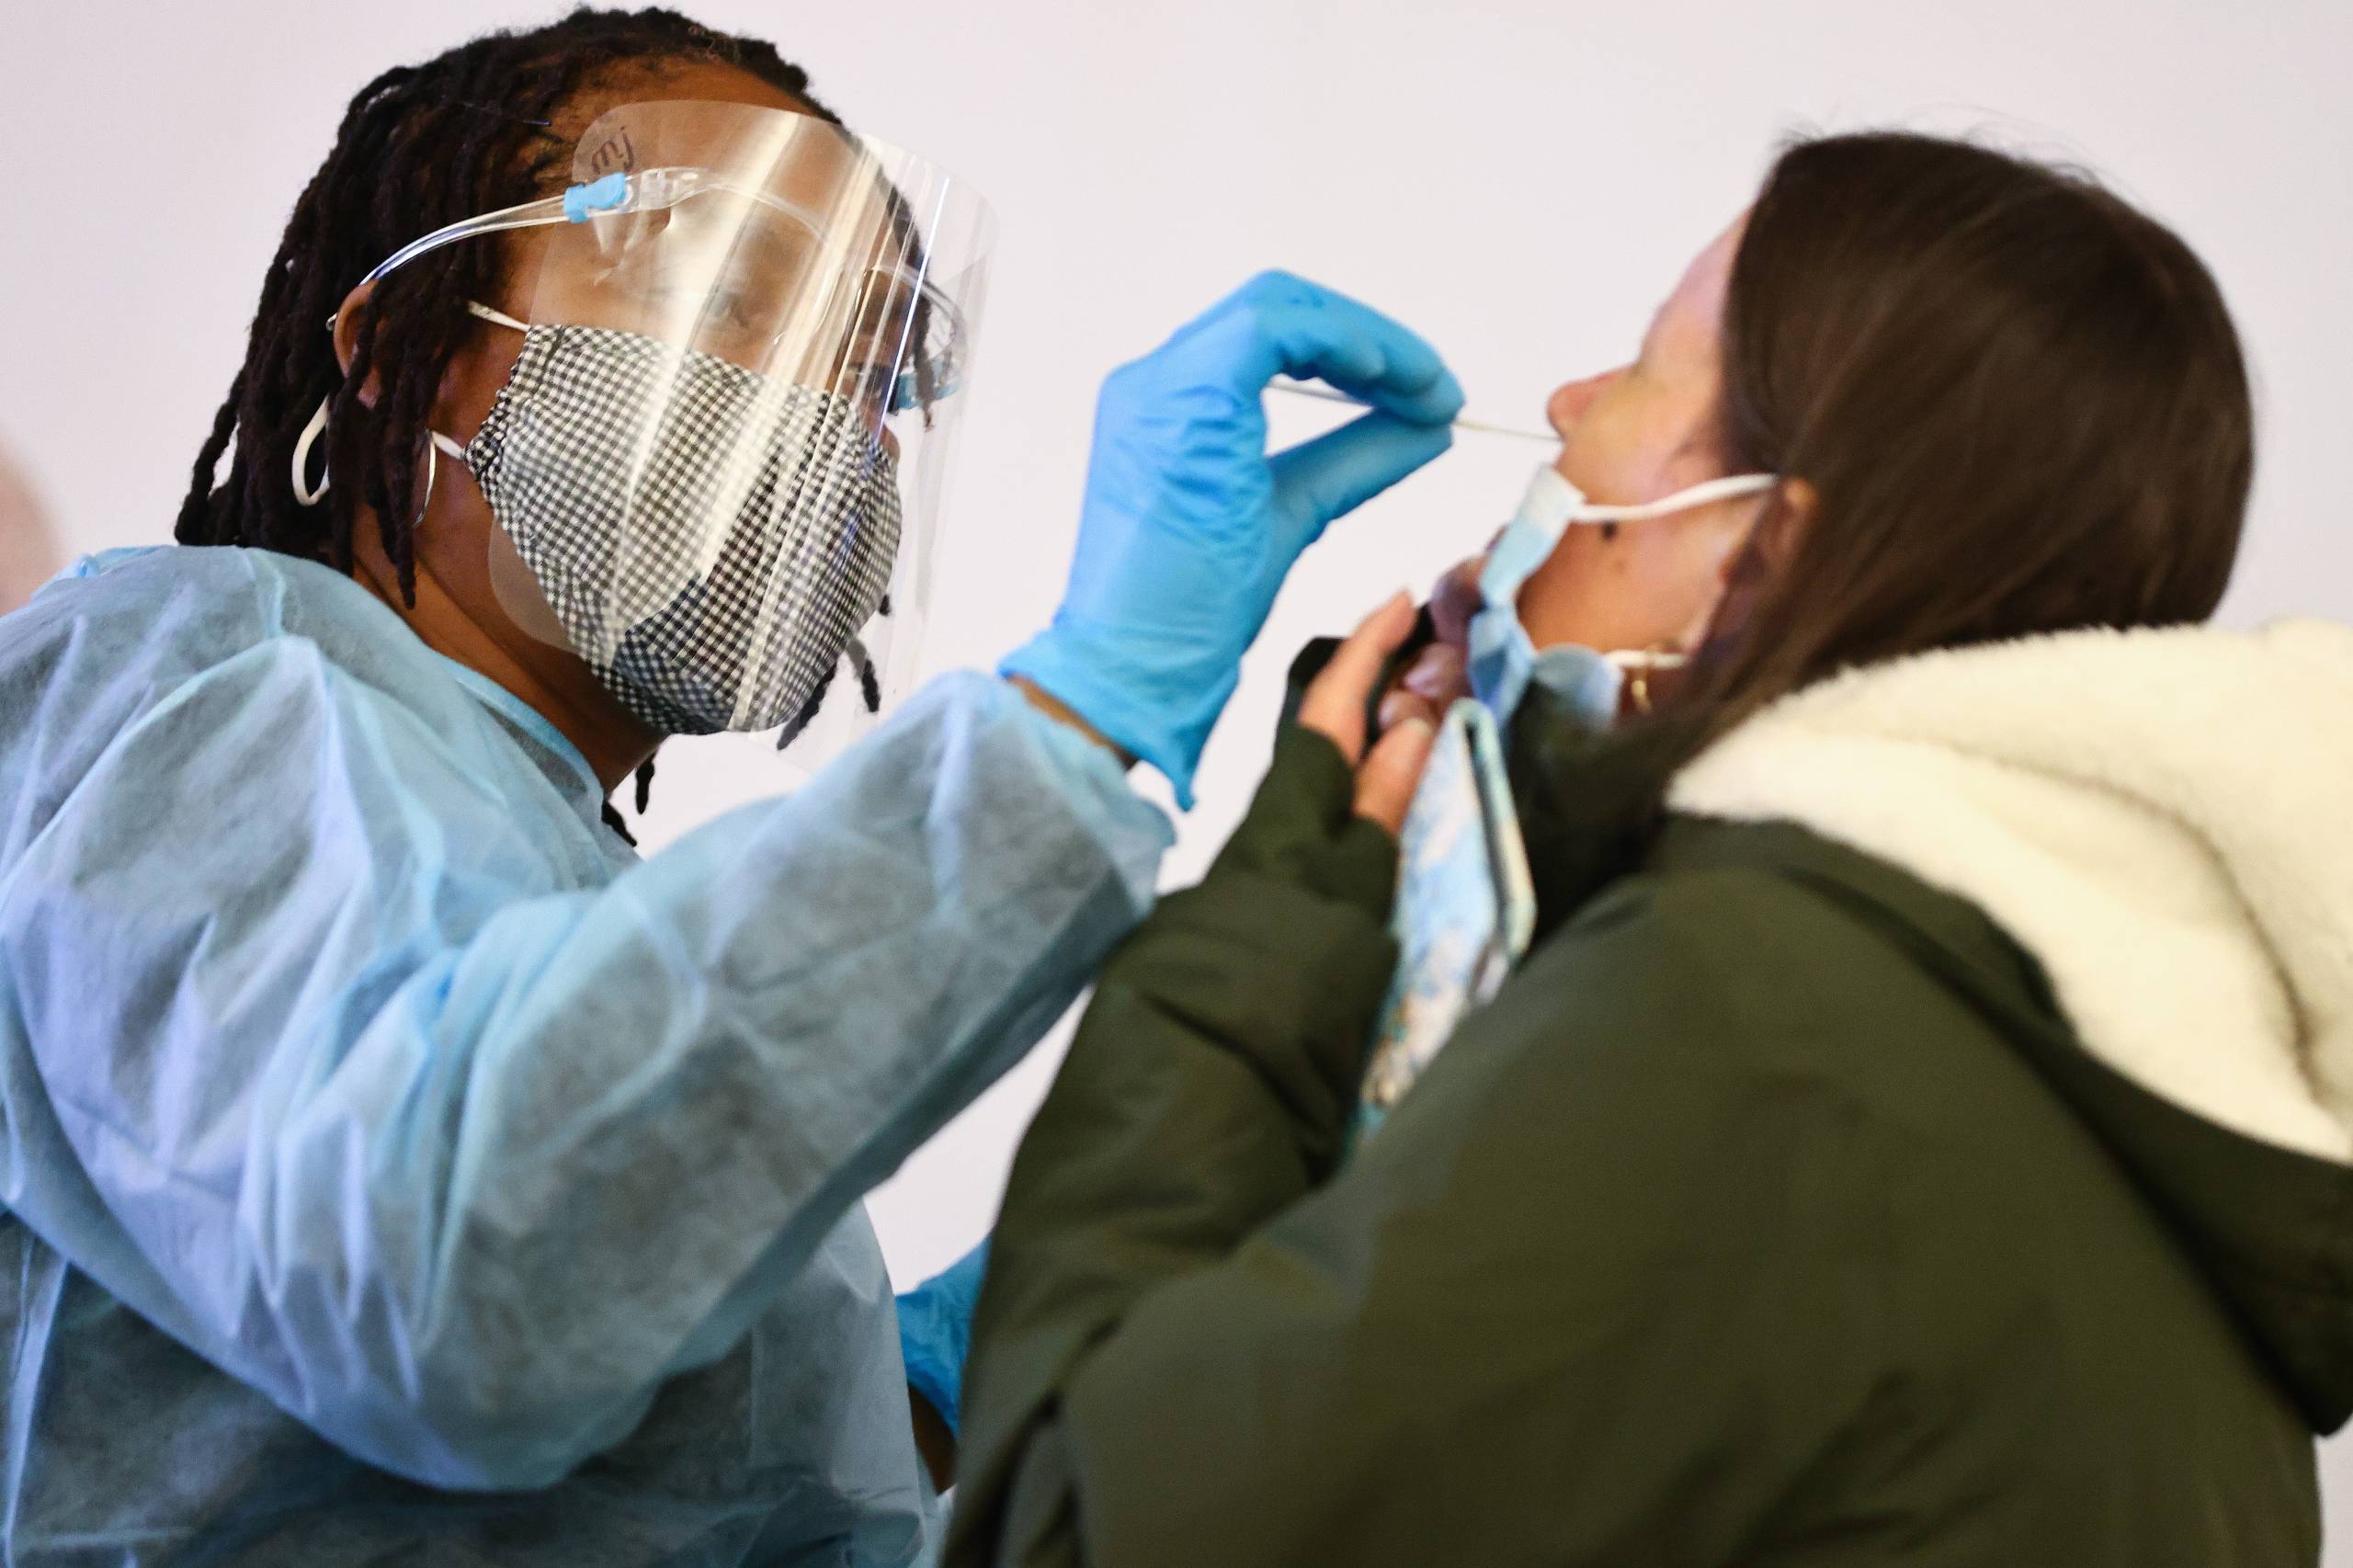 A person wearing scrubs and a face mask and a plastic protector sticks a nose swab into another person's nose.